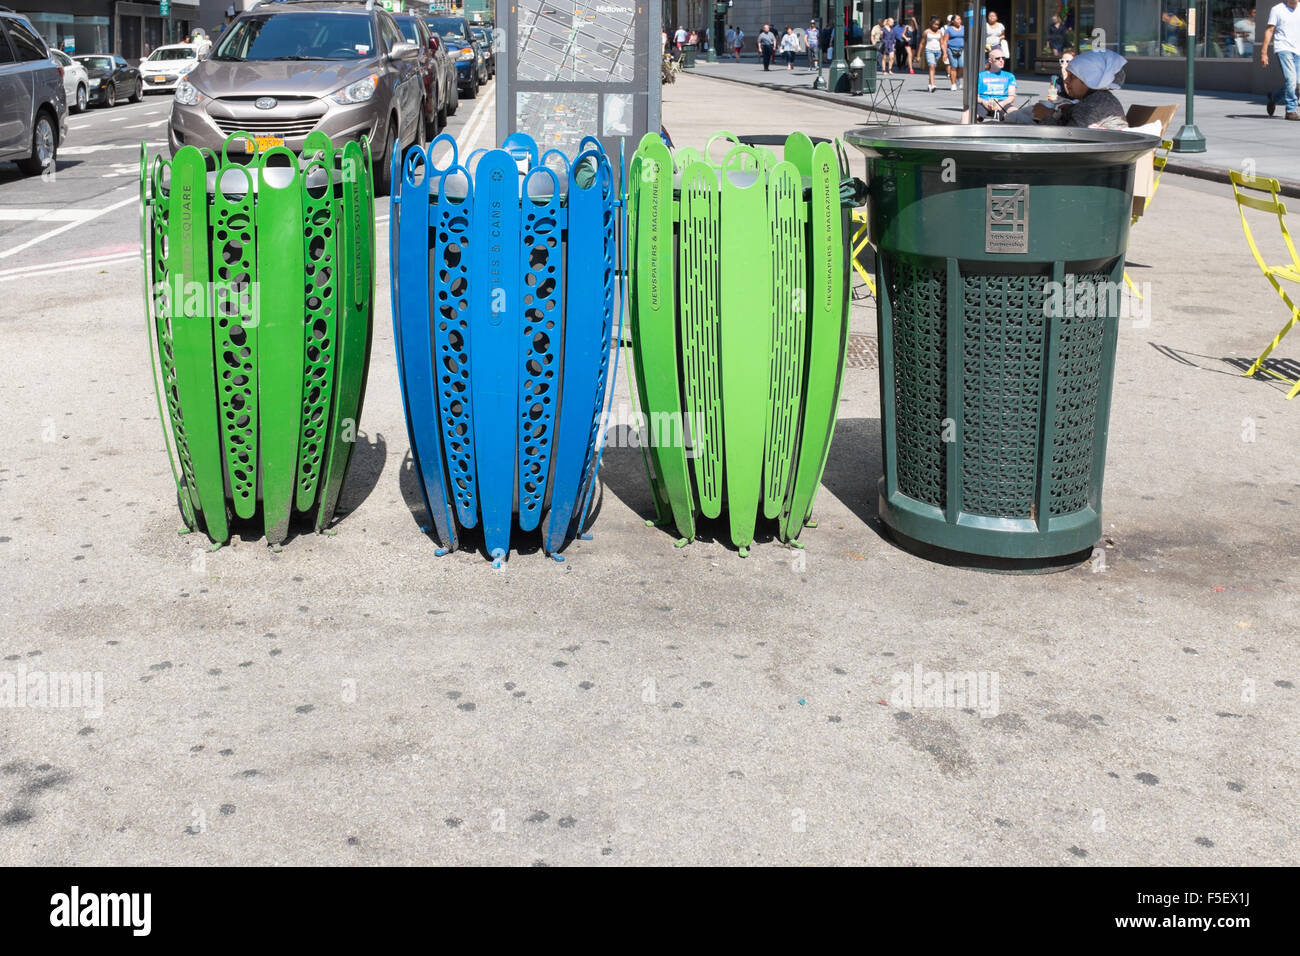 Branded Garbage Cans in Williamsburg Stay Put - The New York Times